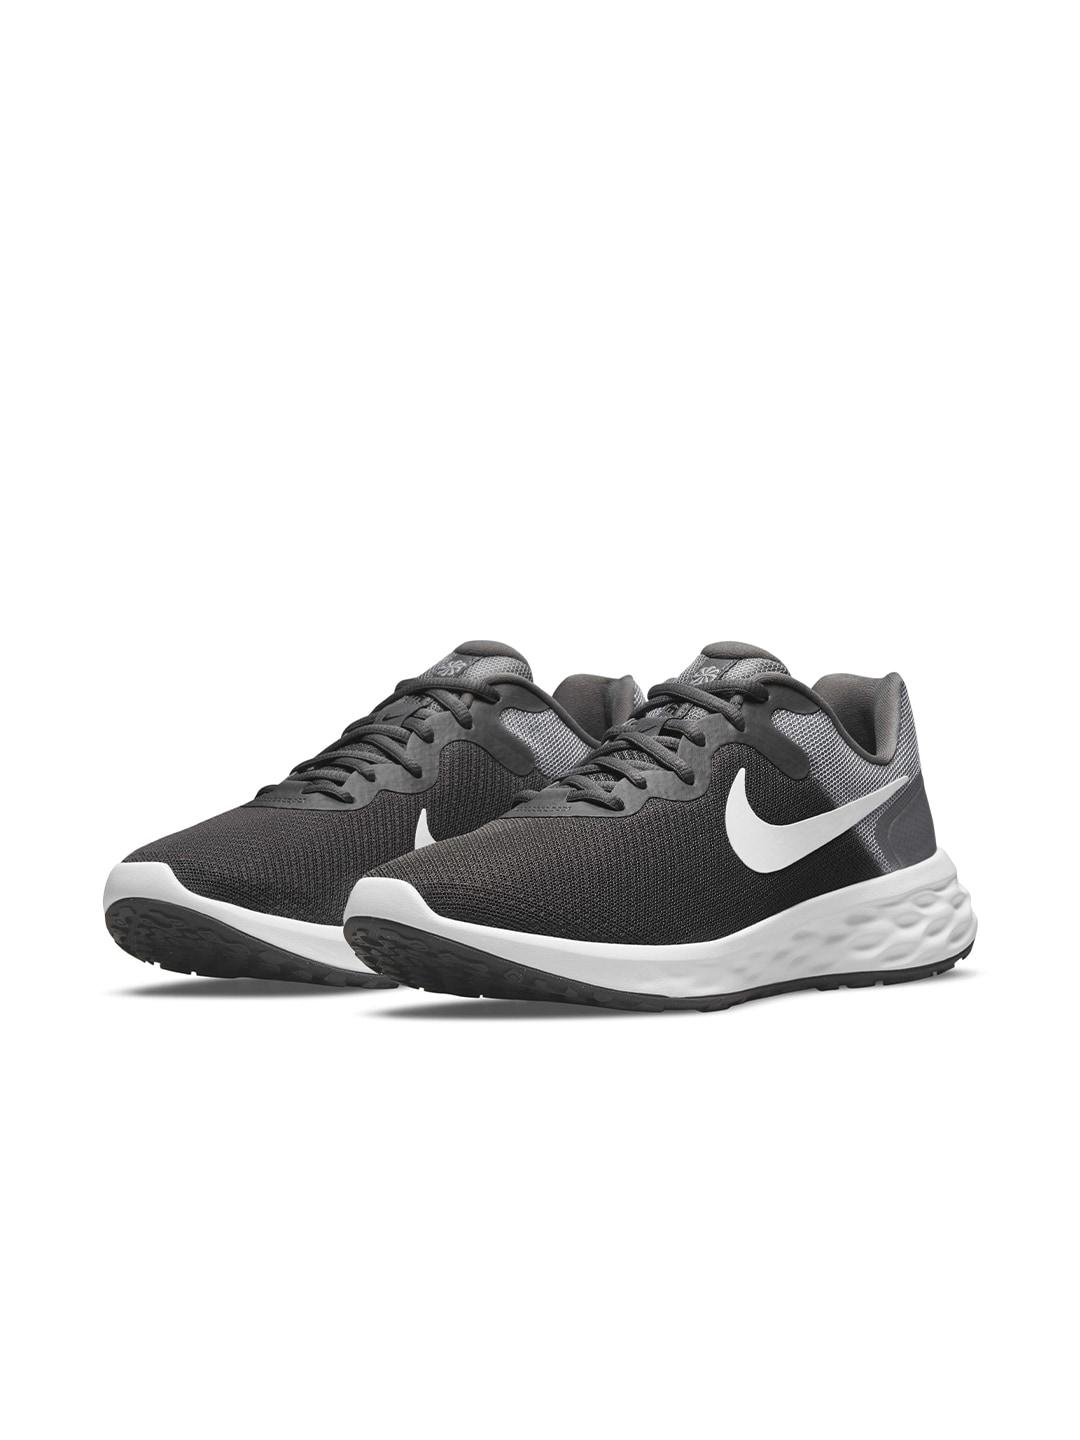 nike-men-textured-road-running-sports-shoes